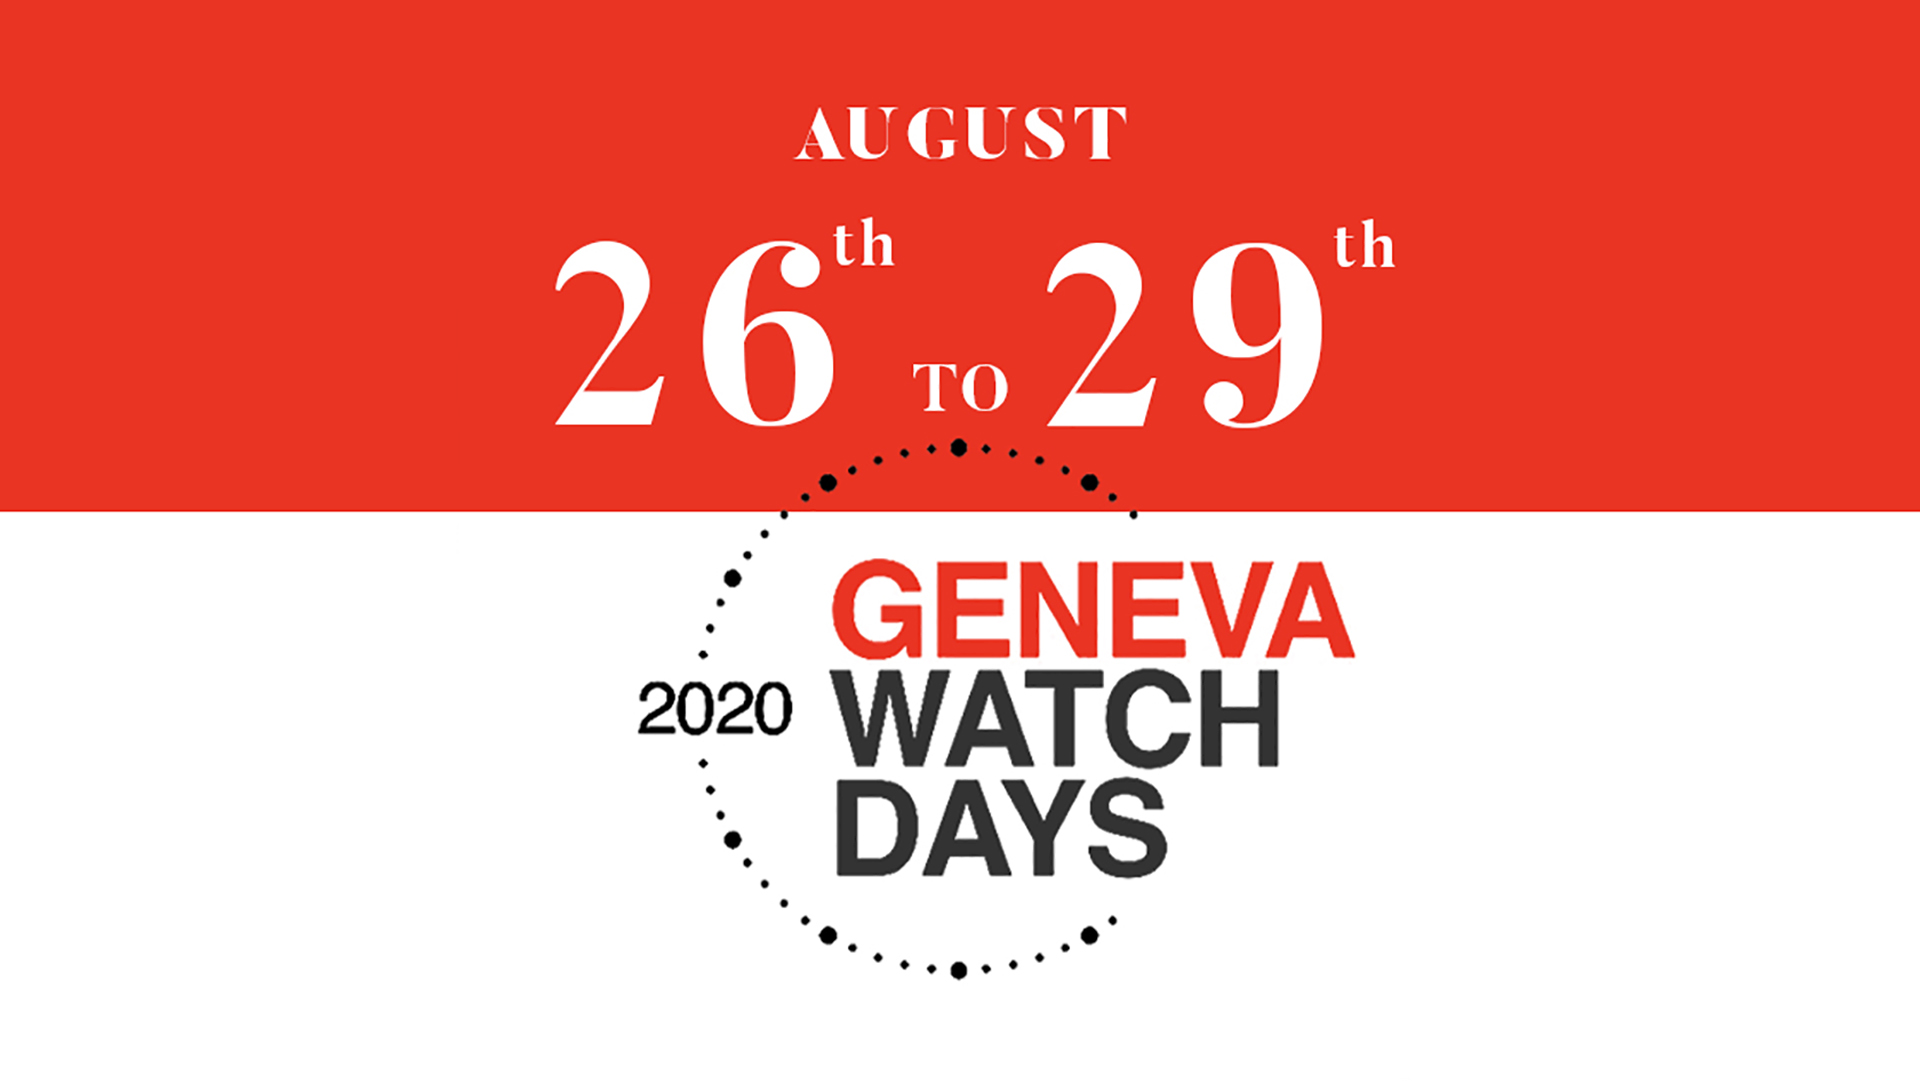 BREAKING NEWS: Geneva Watch Days 2020 Postponed To August 26 ? 29 Amid Further Closures And Cancellations